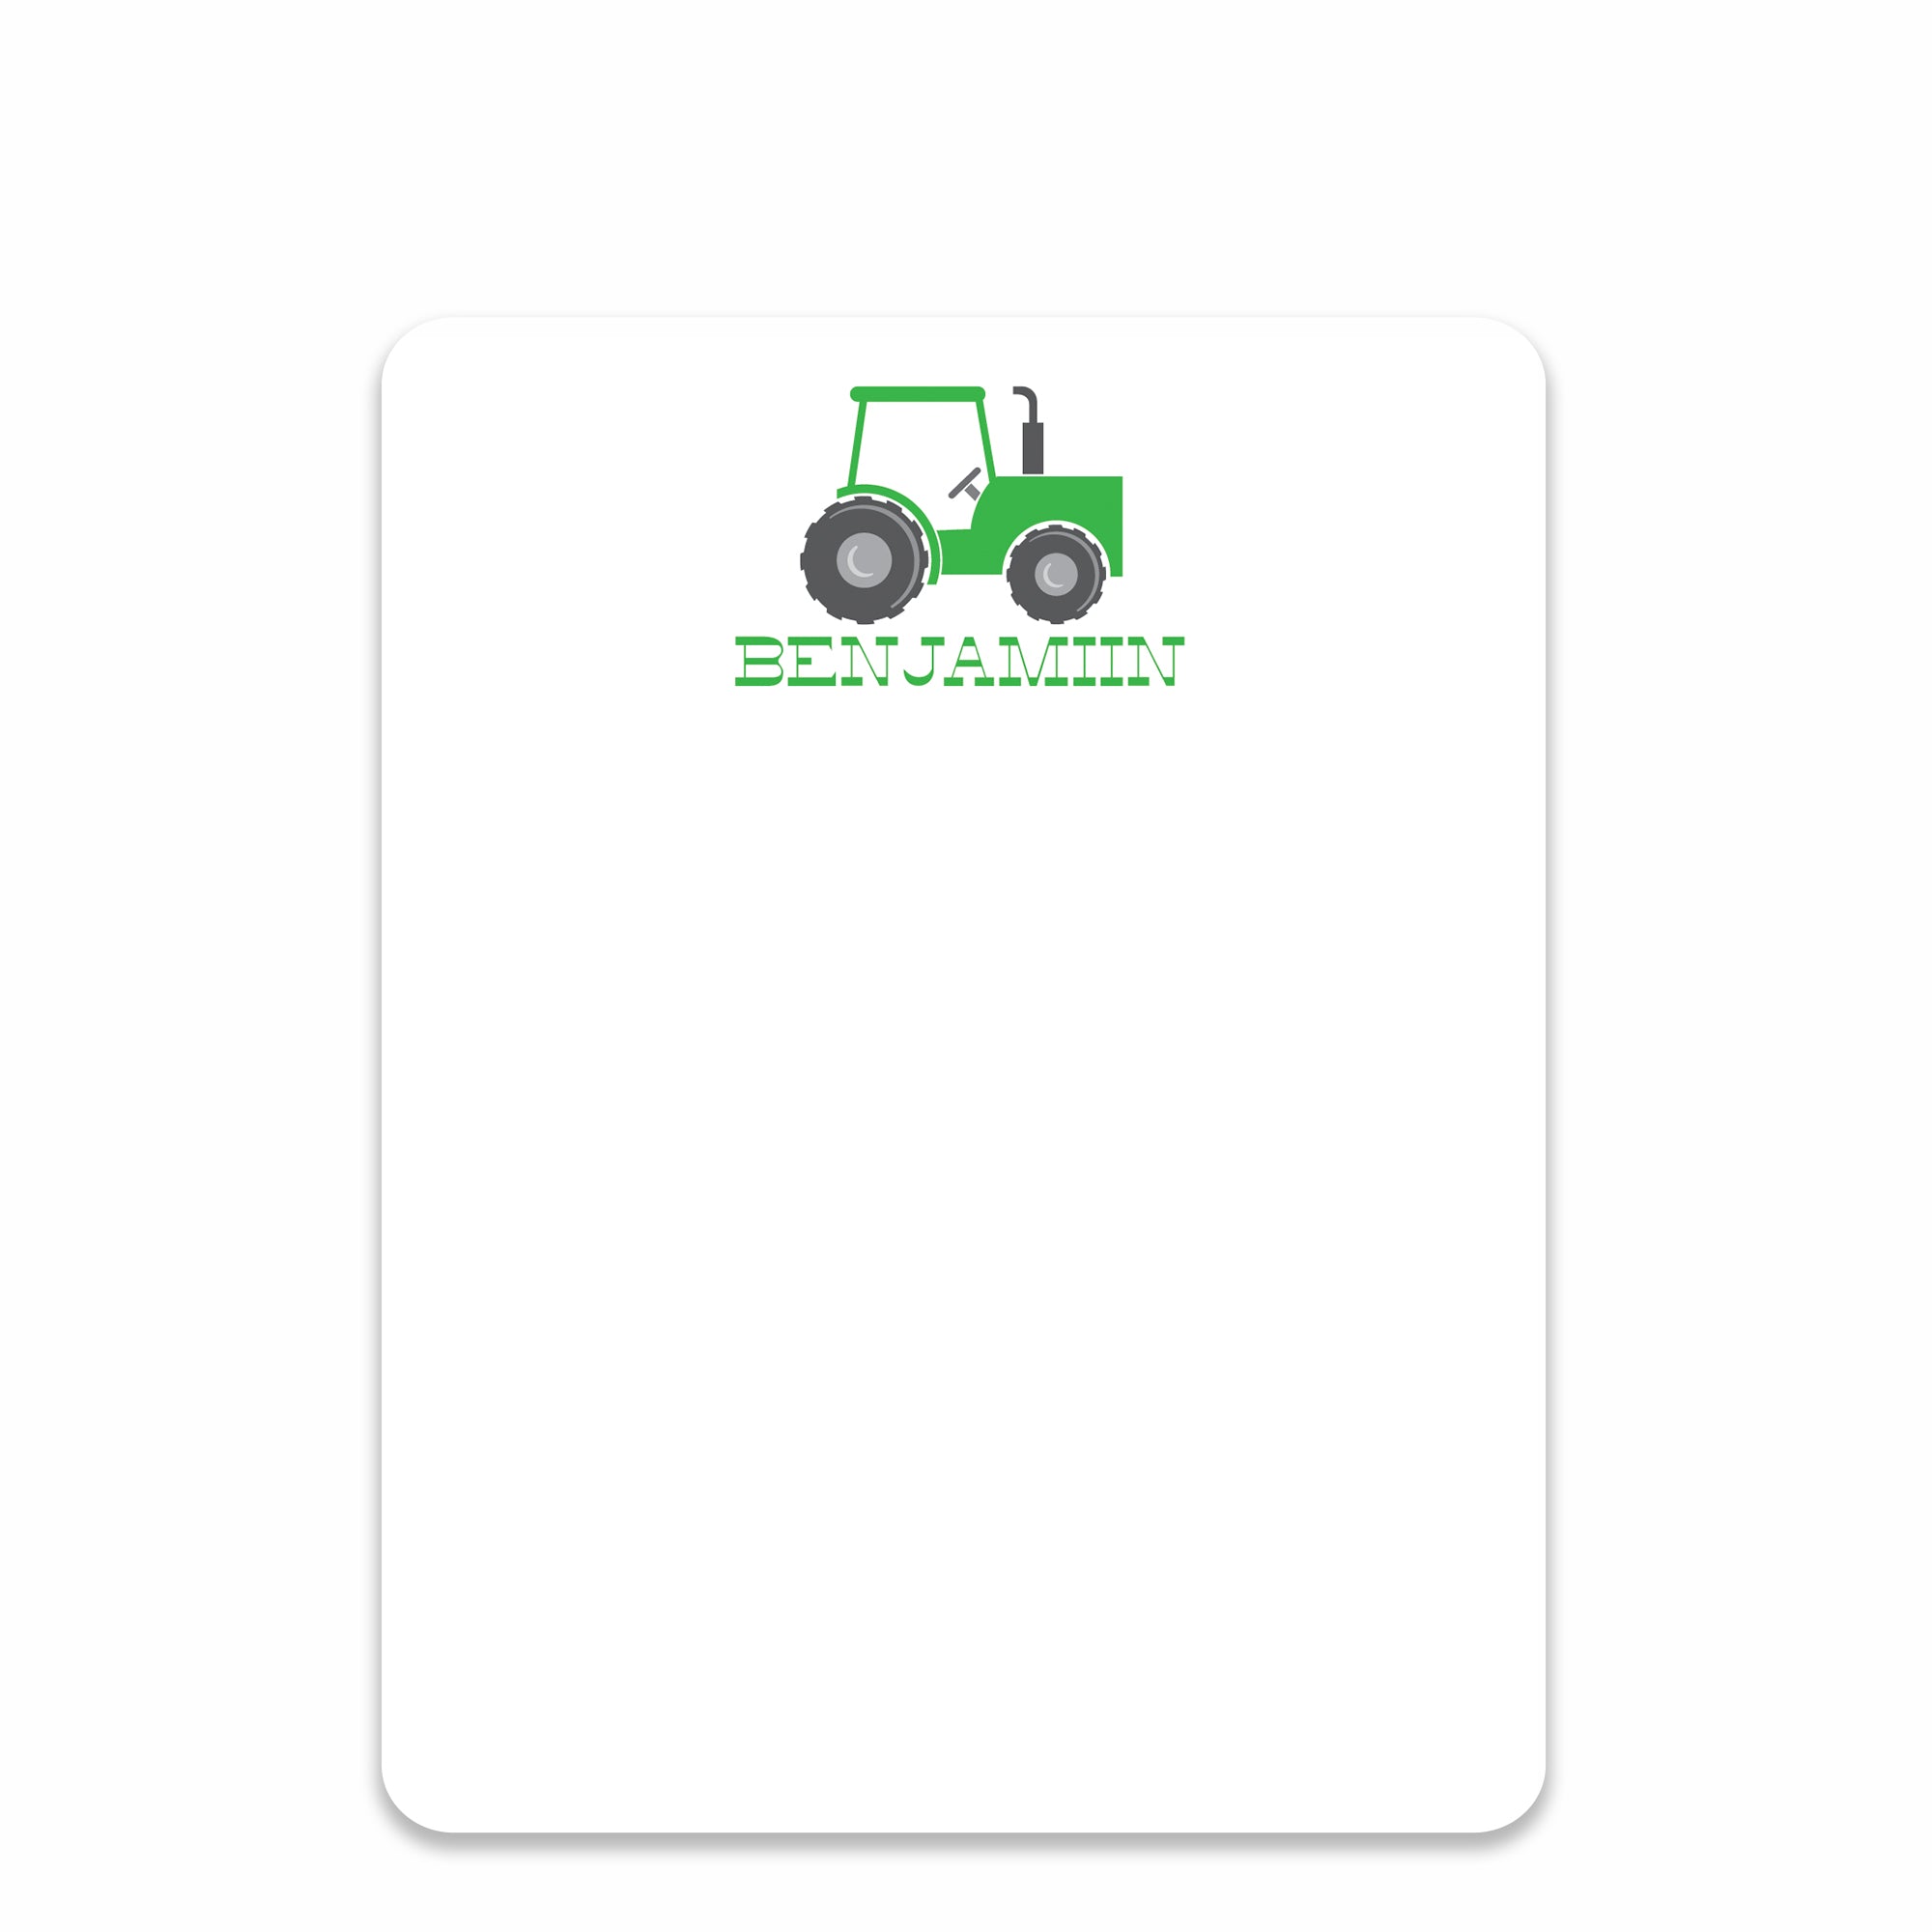 Tractor flat notecards stationery thank you cards, green tractor and yellow stripes, front view